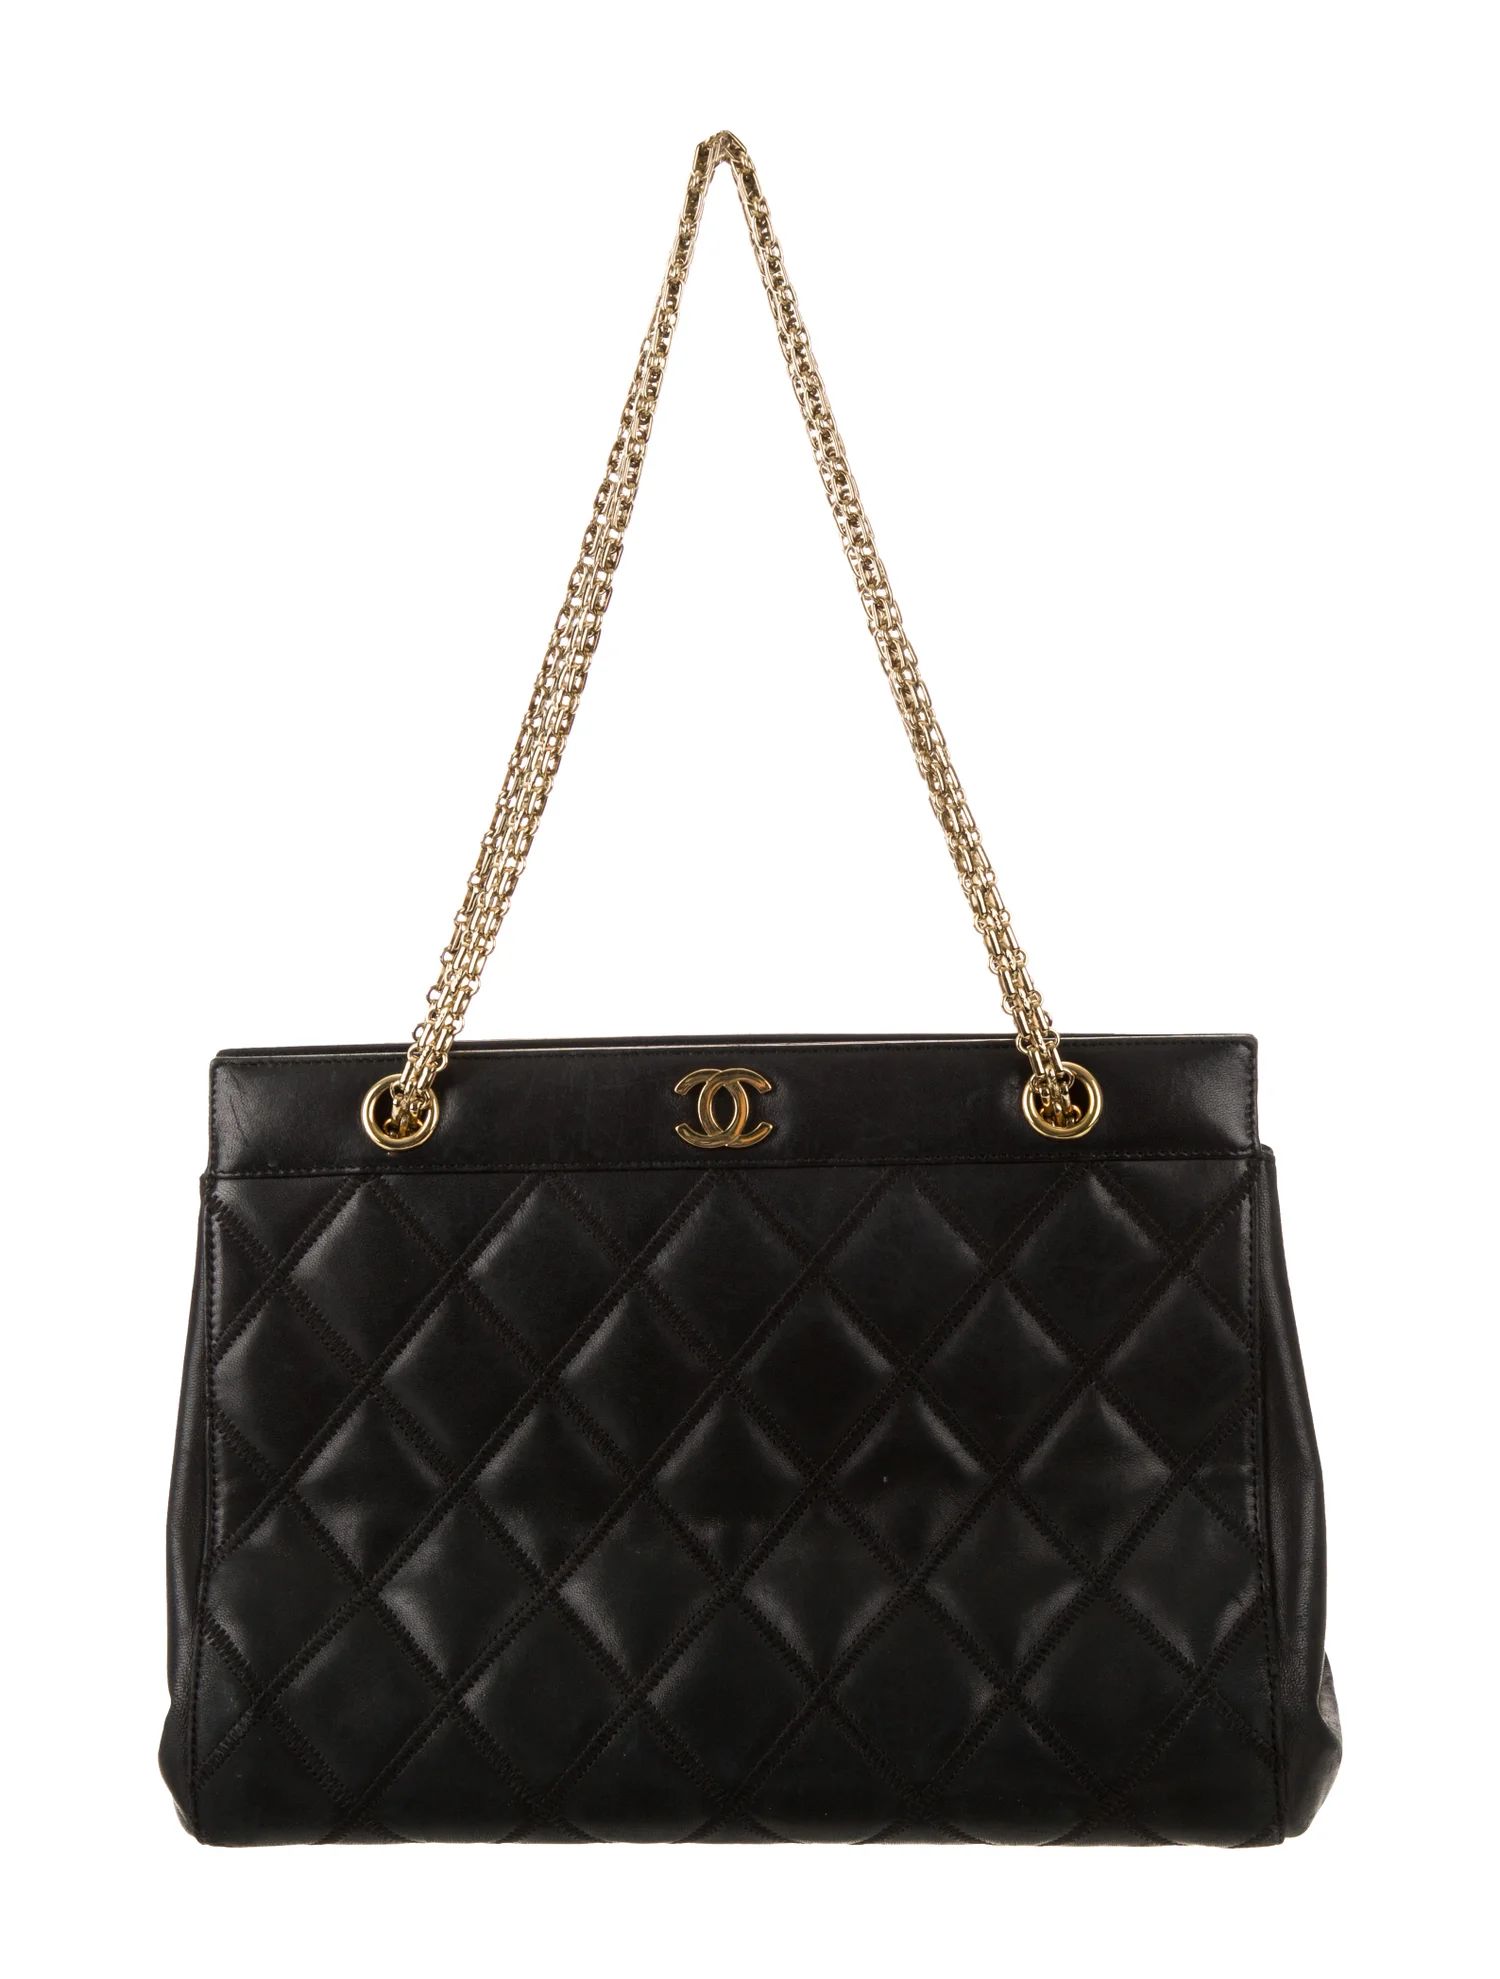 Chanel Vintage Quilted Shoulder Bag - Handbags -
          CHA397669 | The RealReal | The RealReal